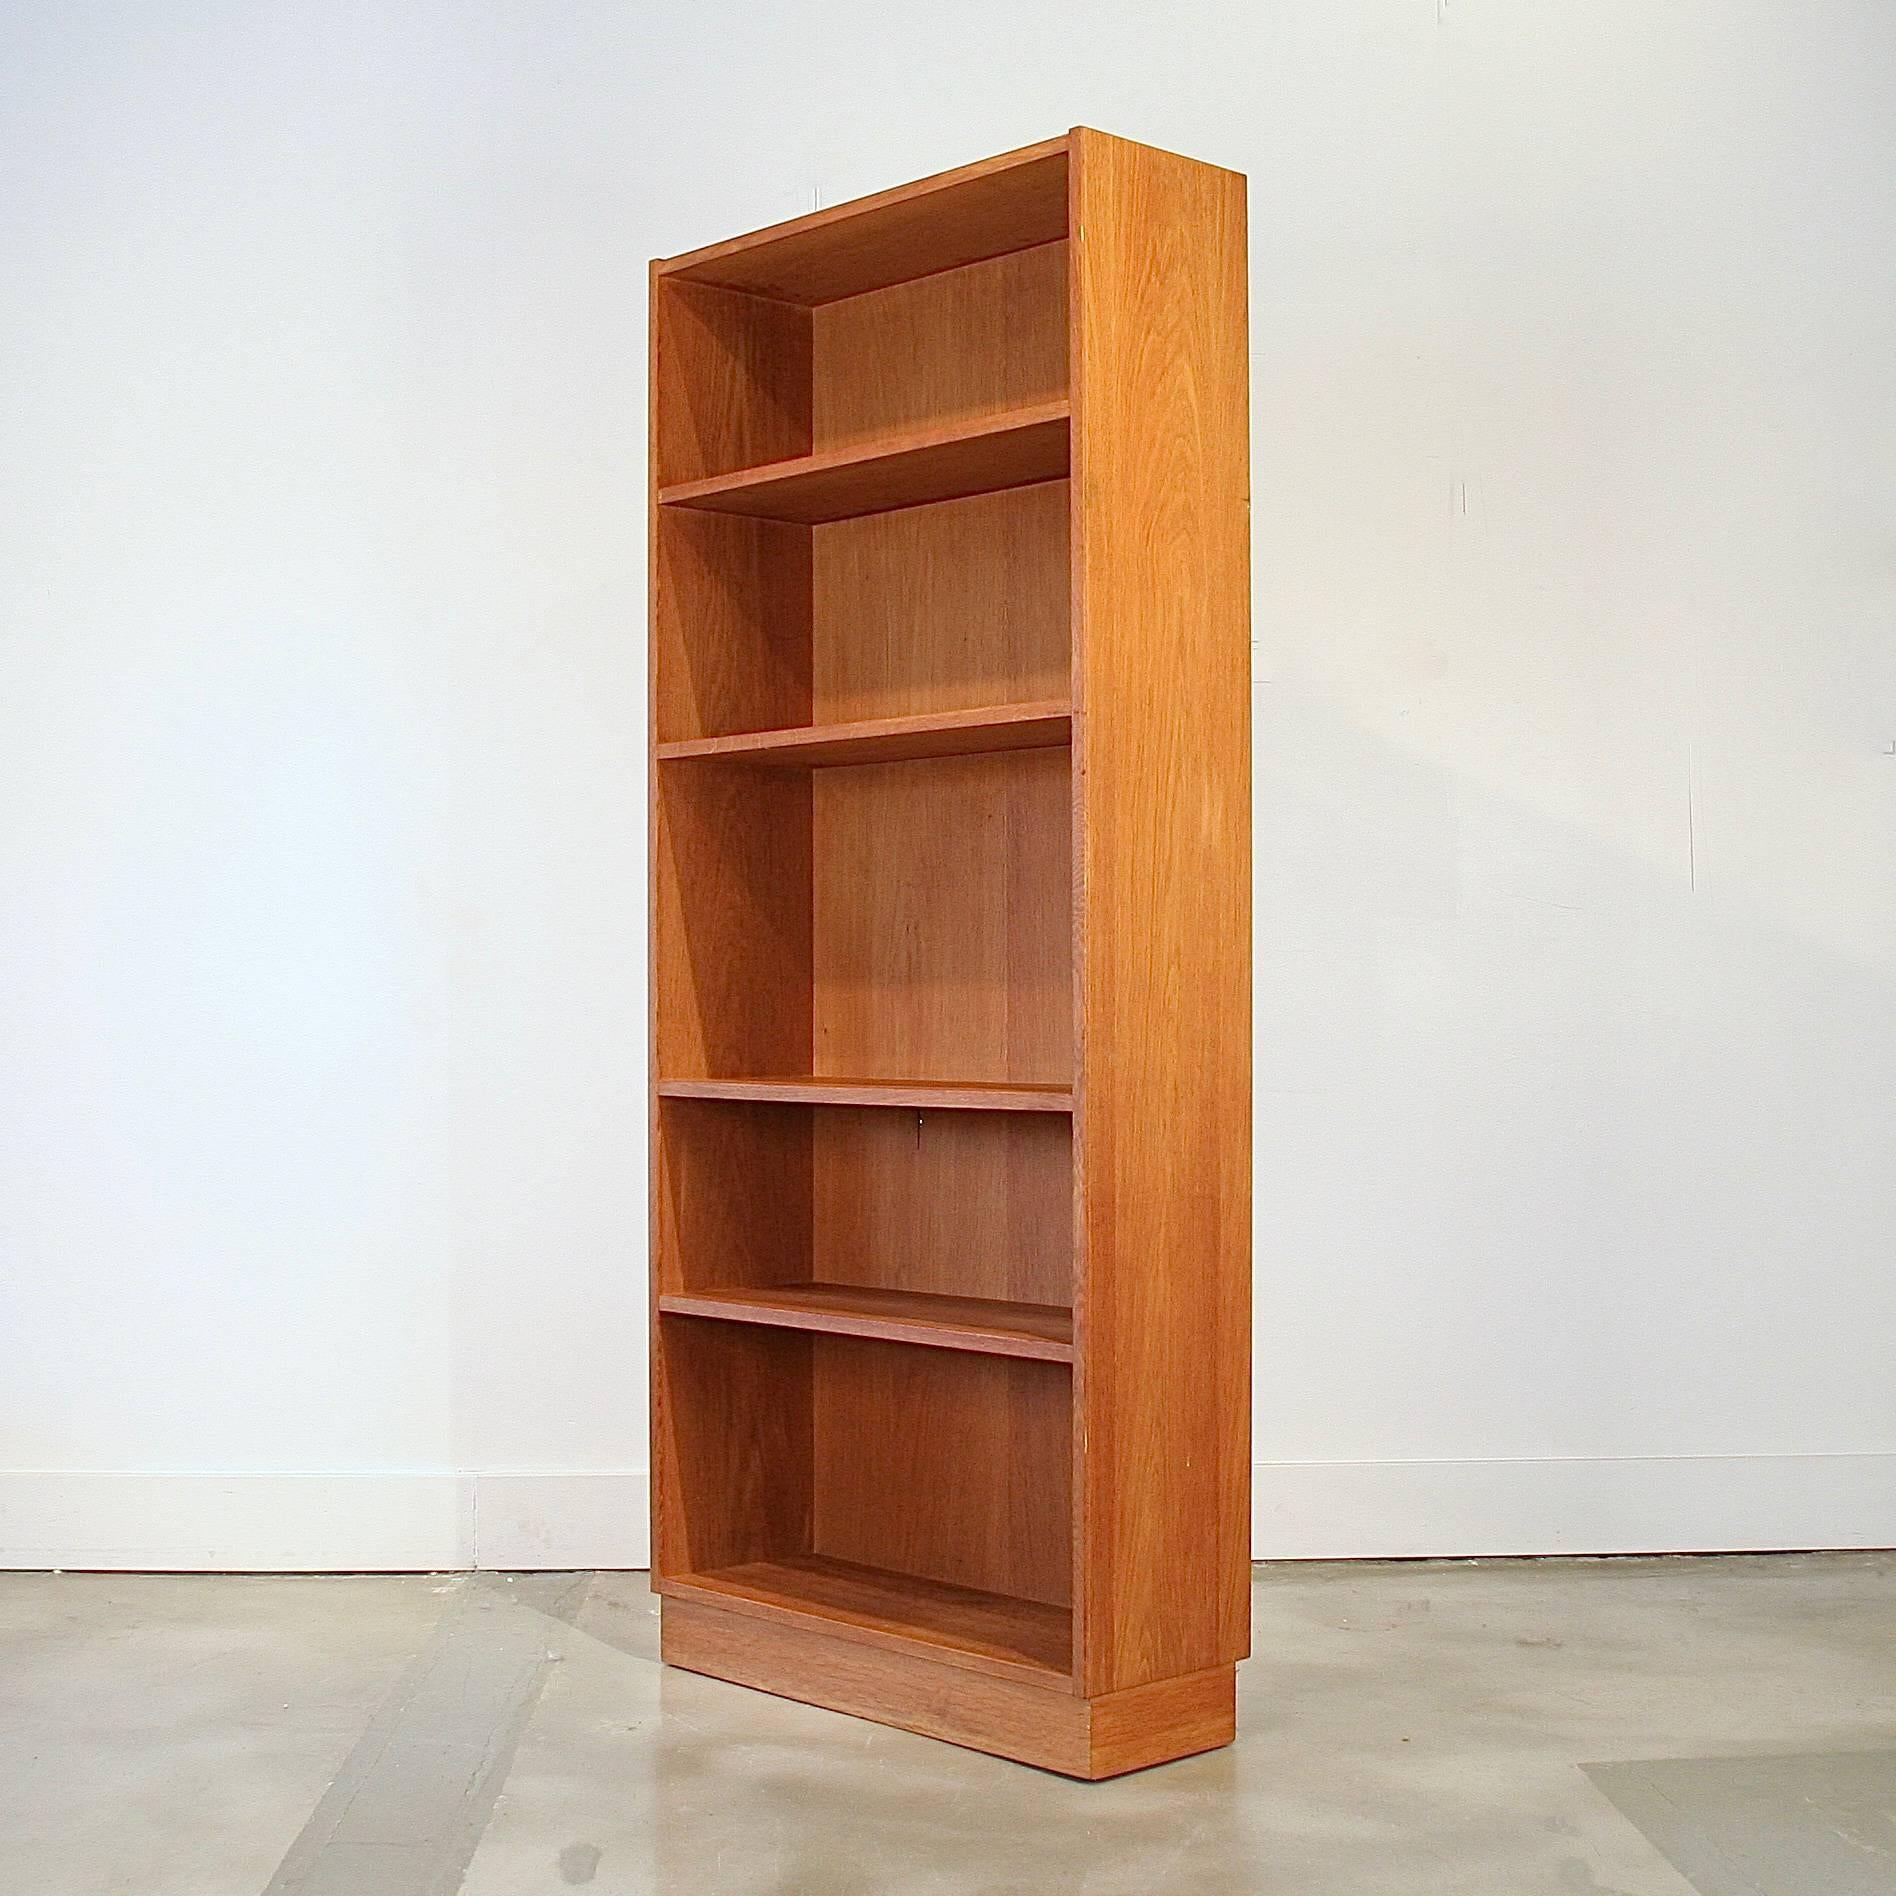 Vintage Danish Oak Bookcase In Excellent Condition For Sale In Vancouver, BC